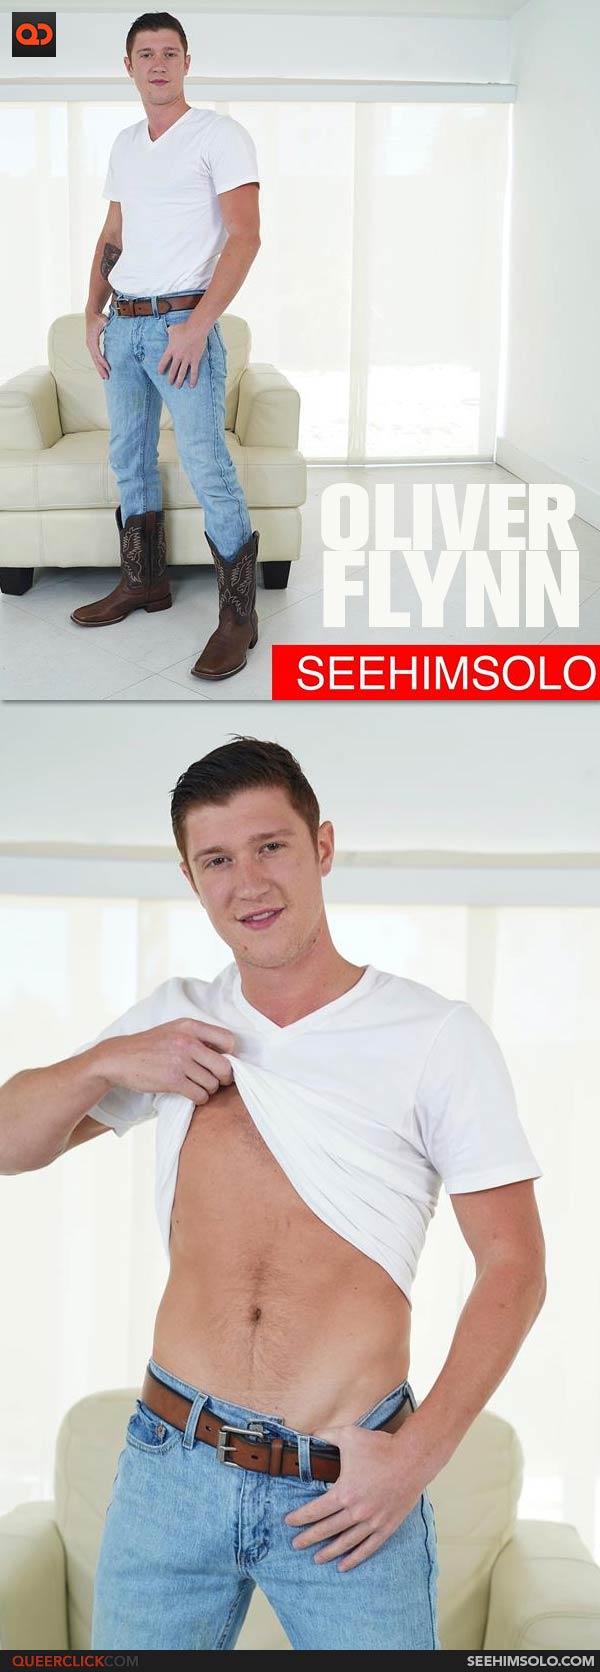 New Site Attack: See Him Solo - Oliver Flynn